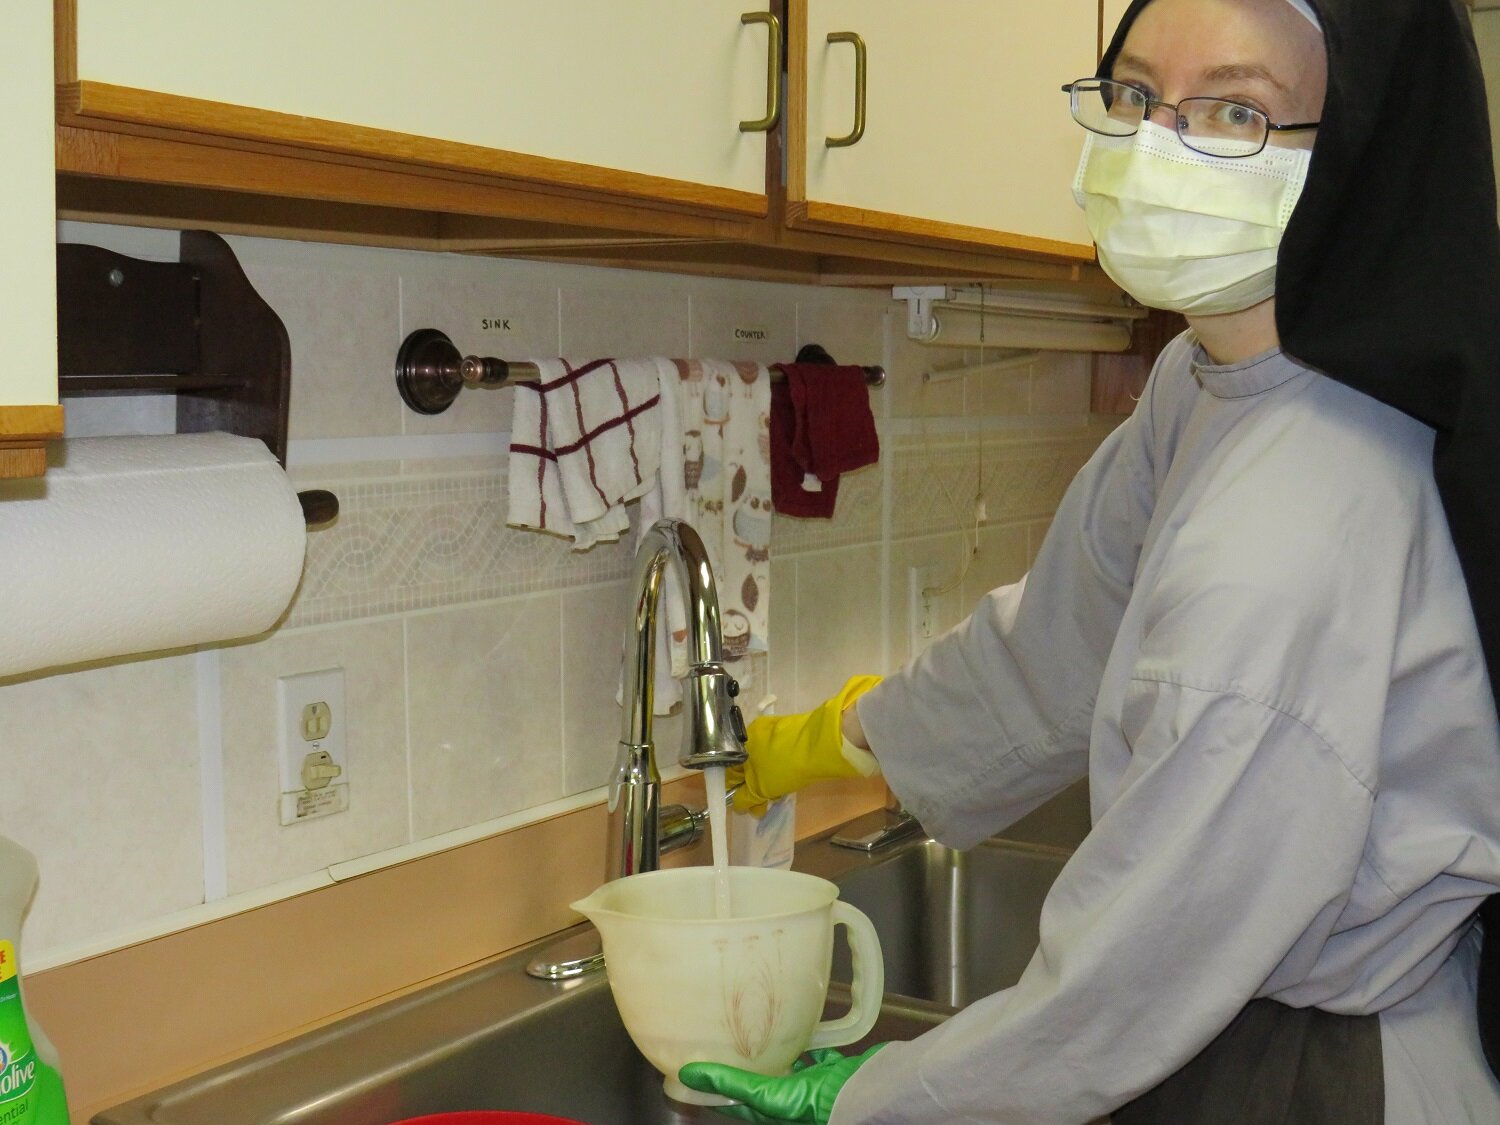  Sister Cecilia Maria mixing up a new batch of peroxide cleaning solution 